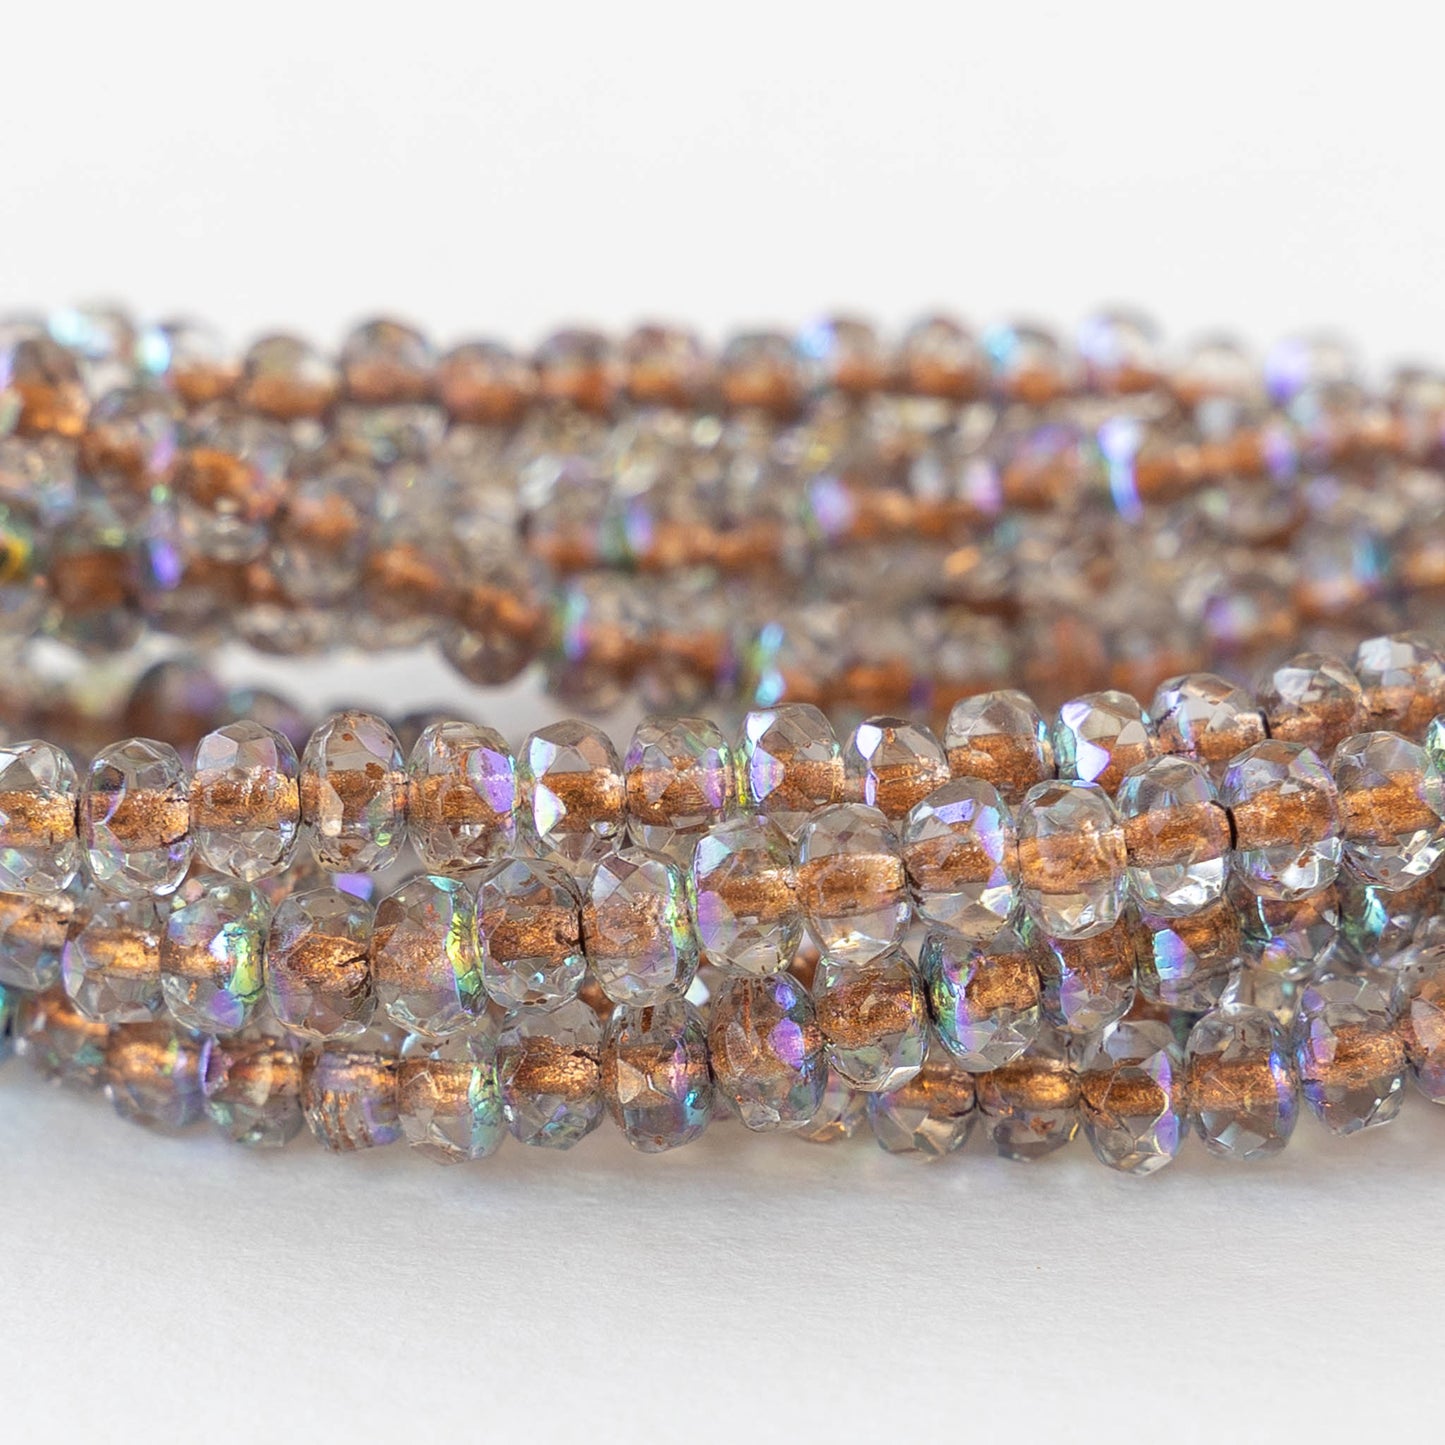 4mm Faceted Rondelle Beads - Copper Lined Crystal AB - 50 beads